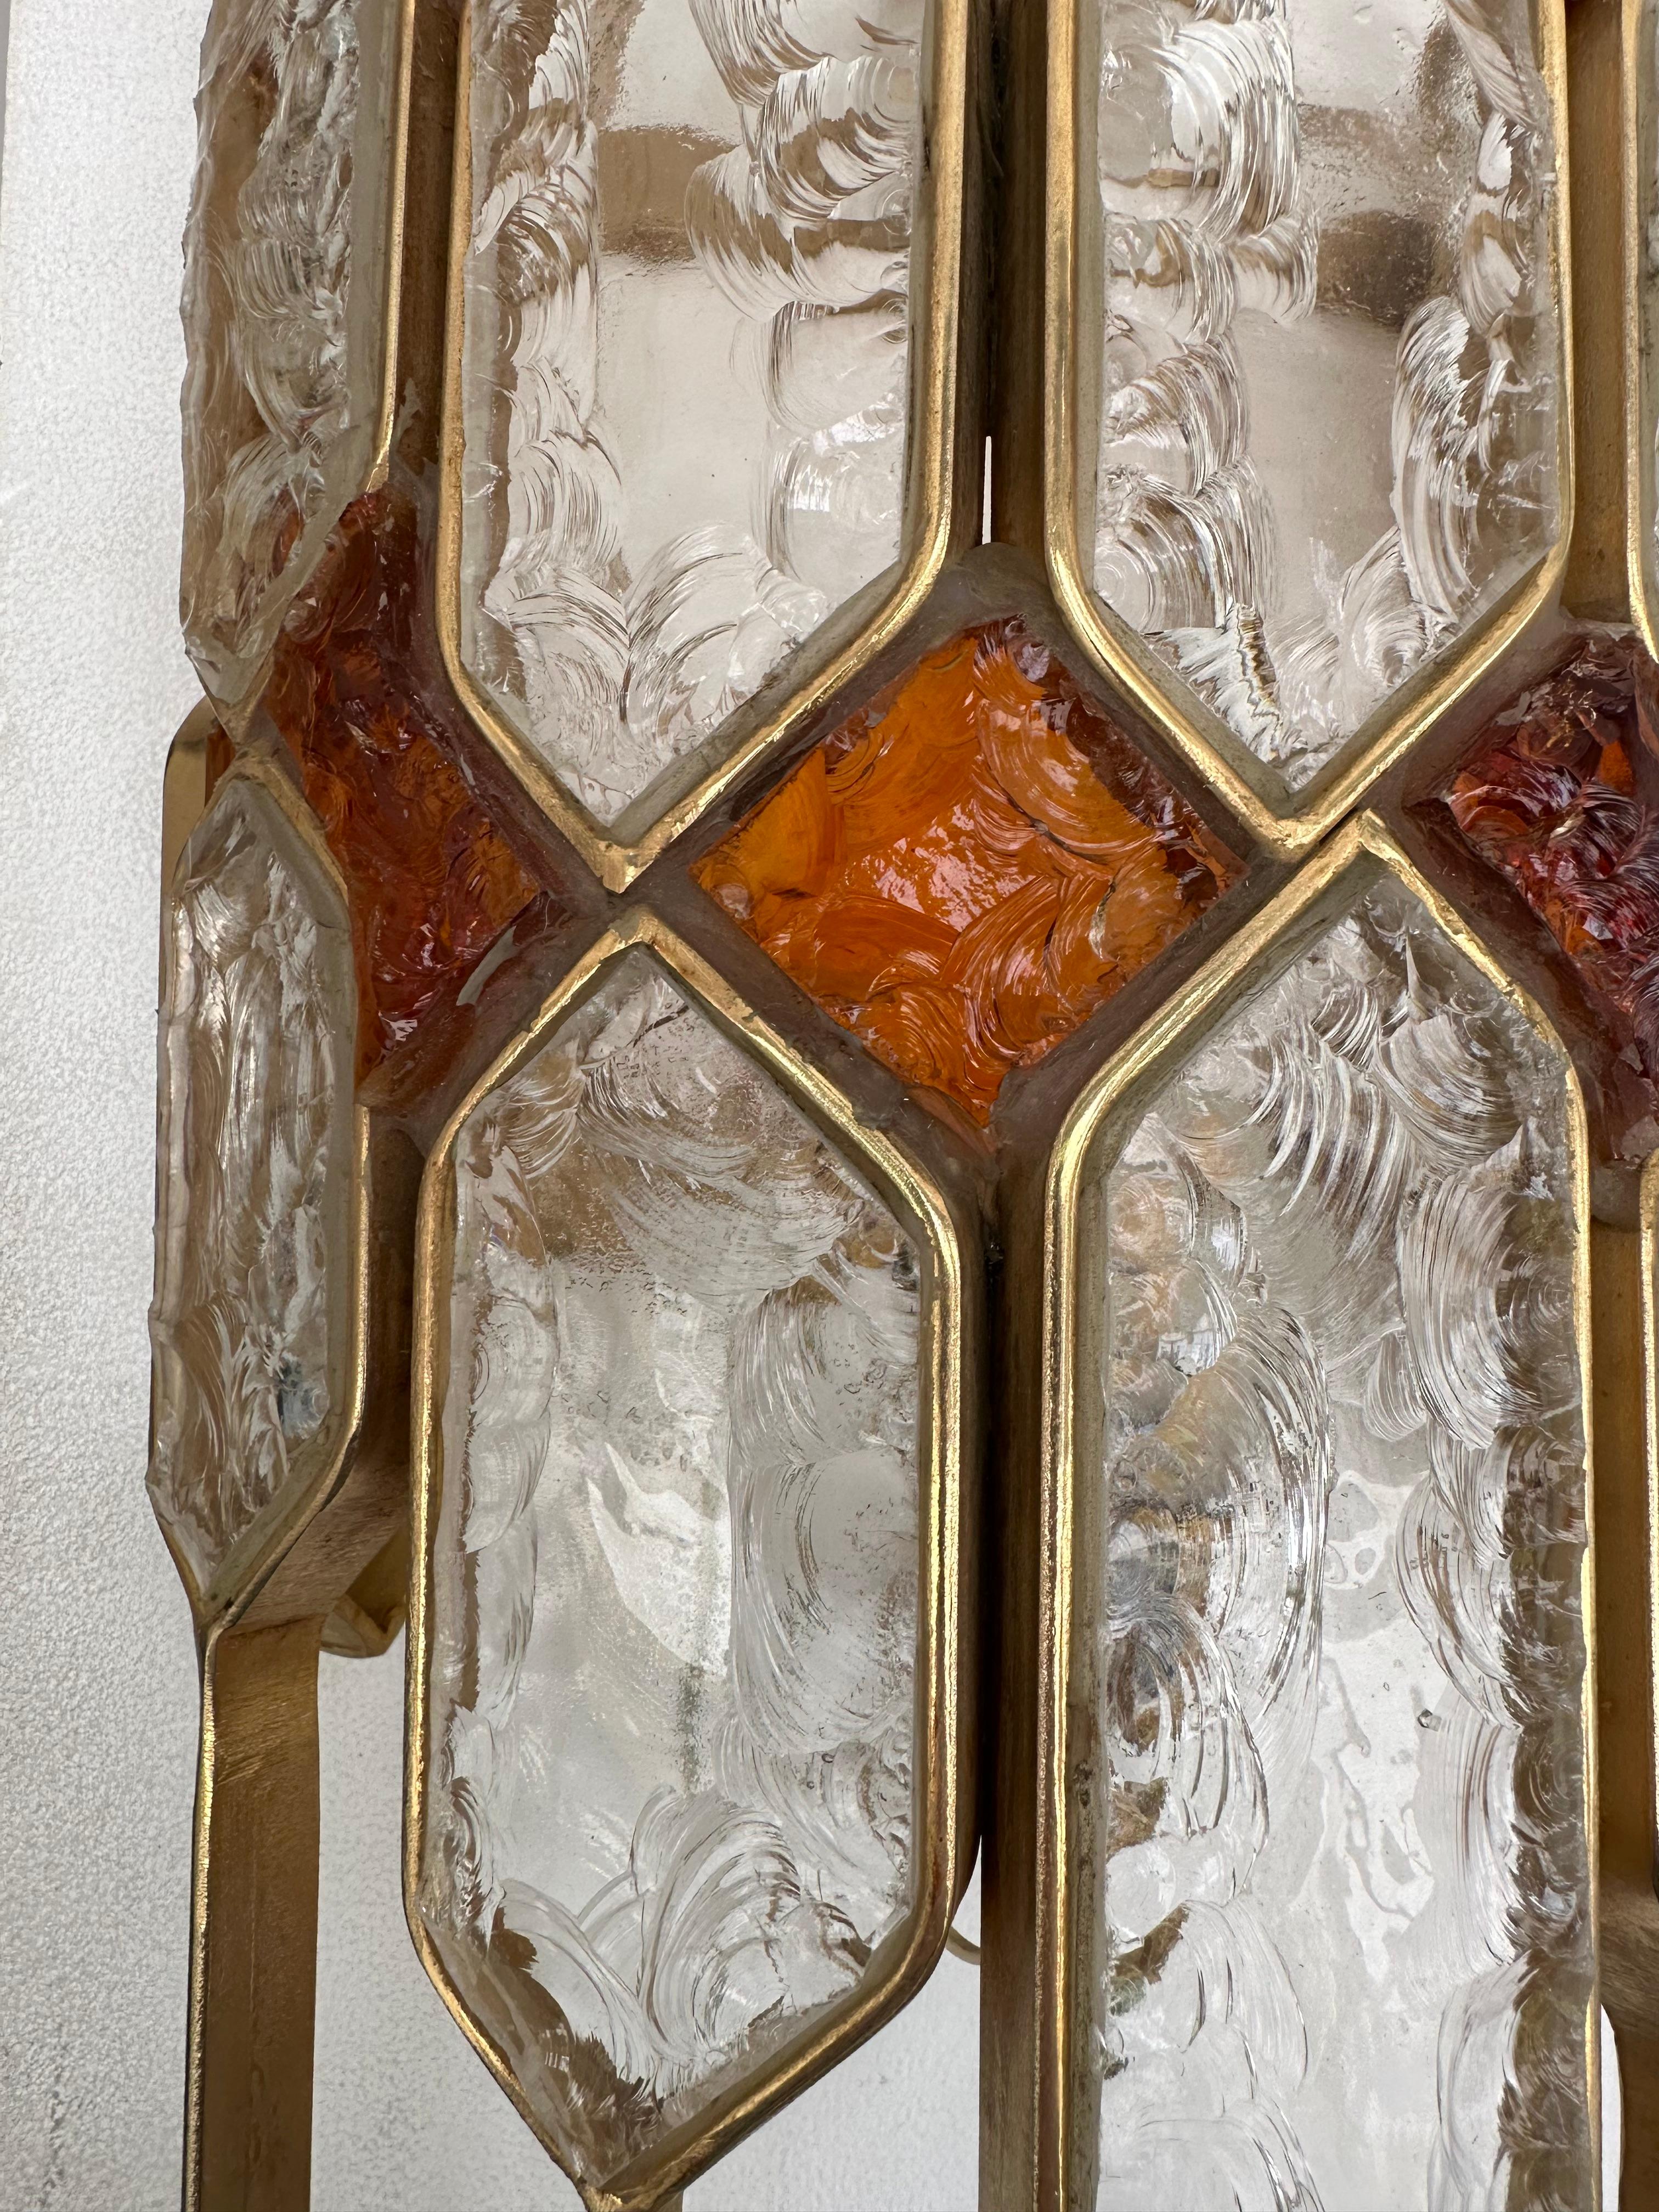 Large Pair of Hammered Glass Gilt Wrought Iron Sconces by Longobard, Italy 1970s For Sale 7